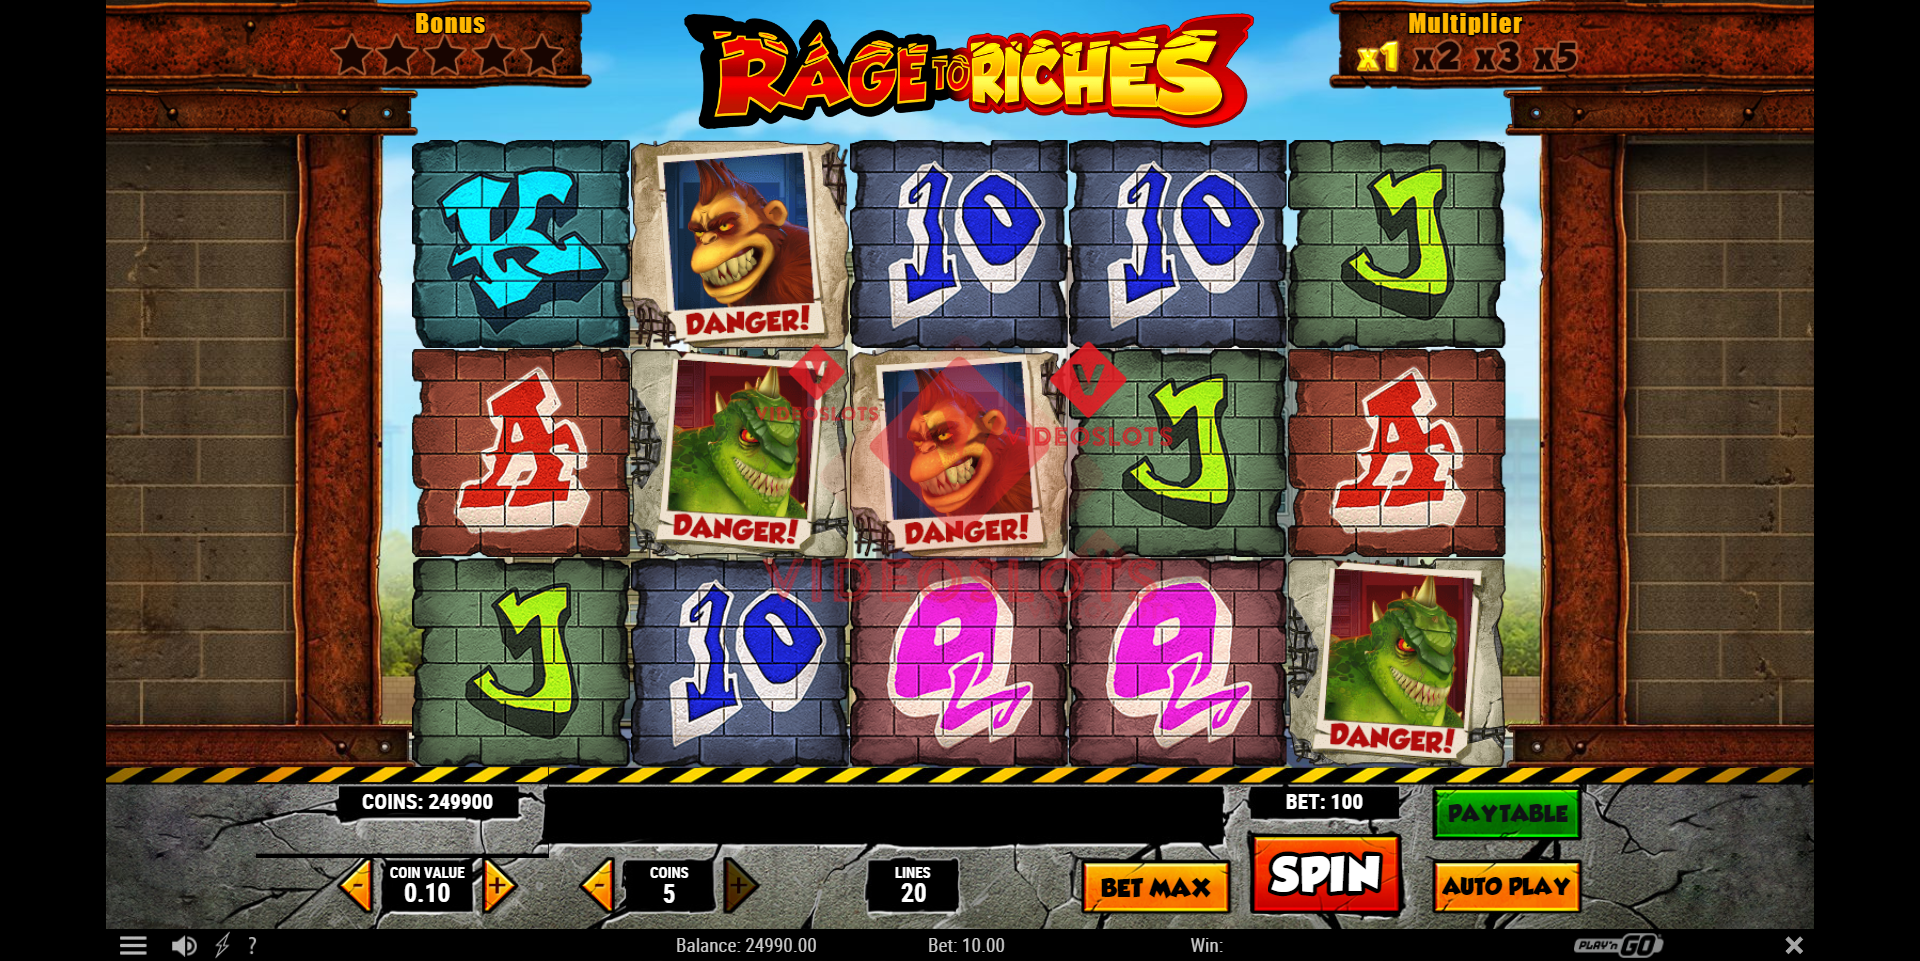 Base Game for Rage to Riches slot from Play'n Go